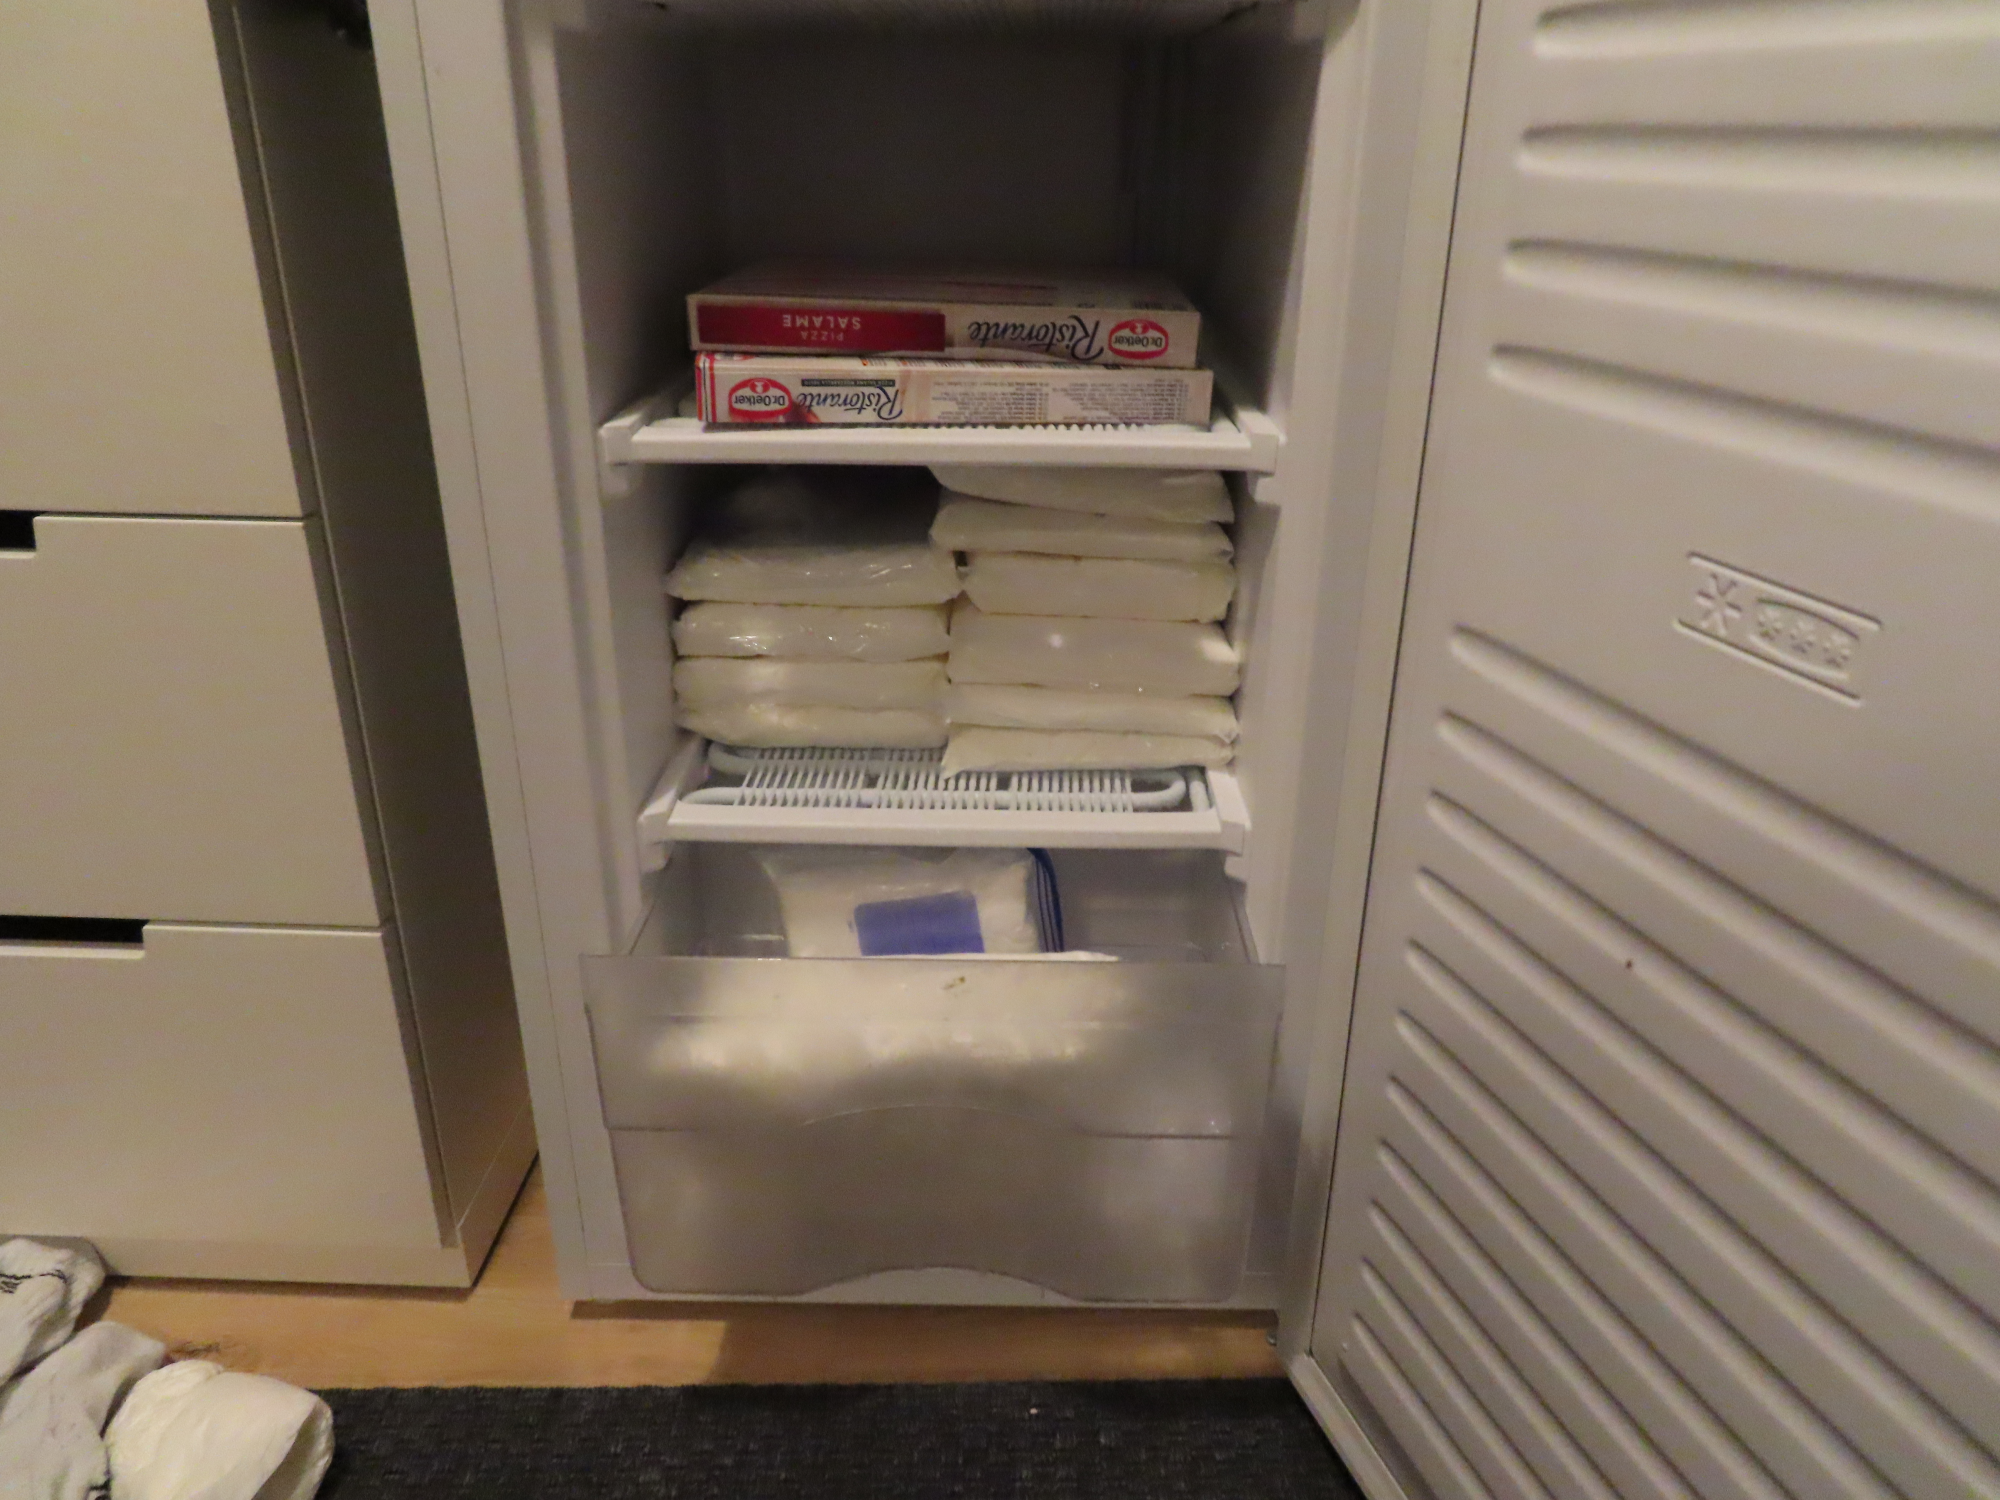 A photo taken from a police search showing bags of white powder stacked in a freezer.